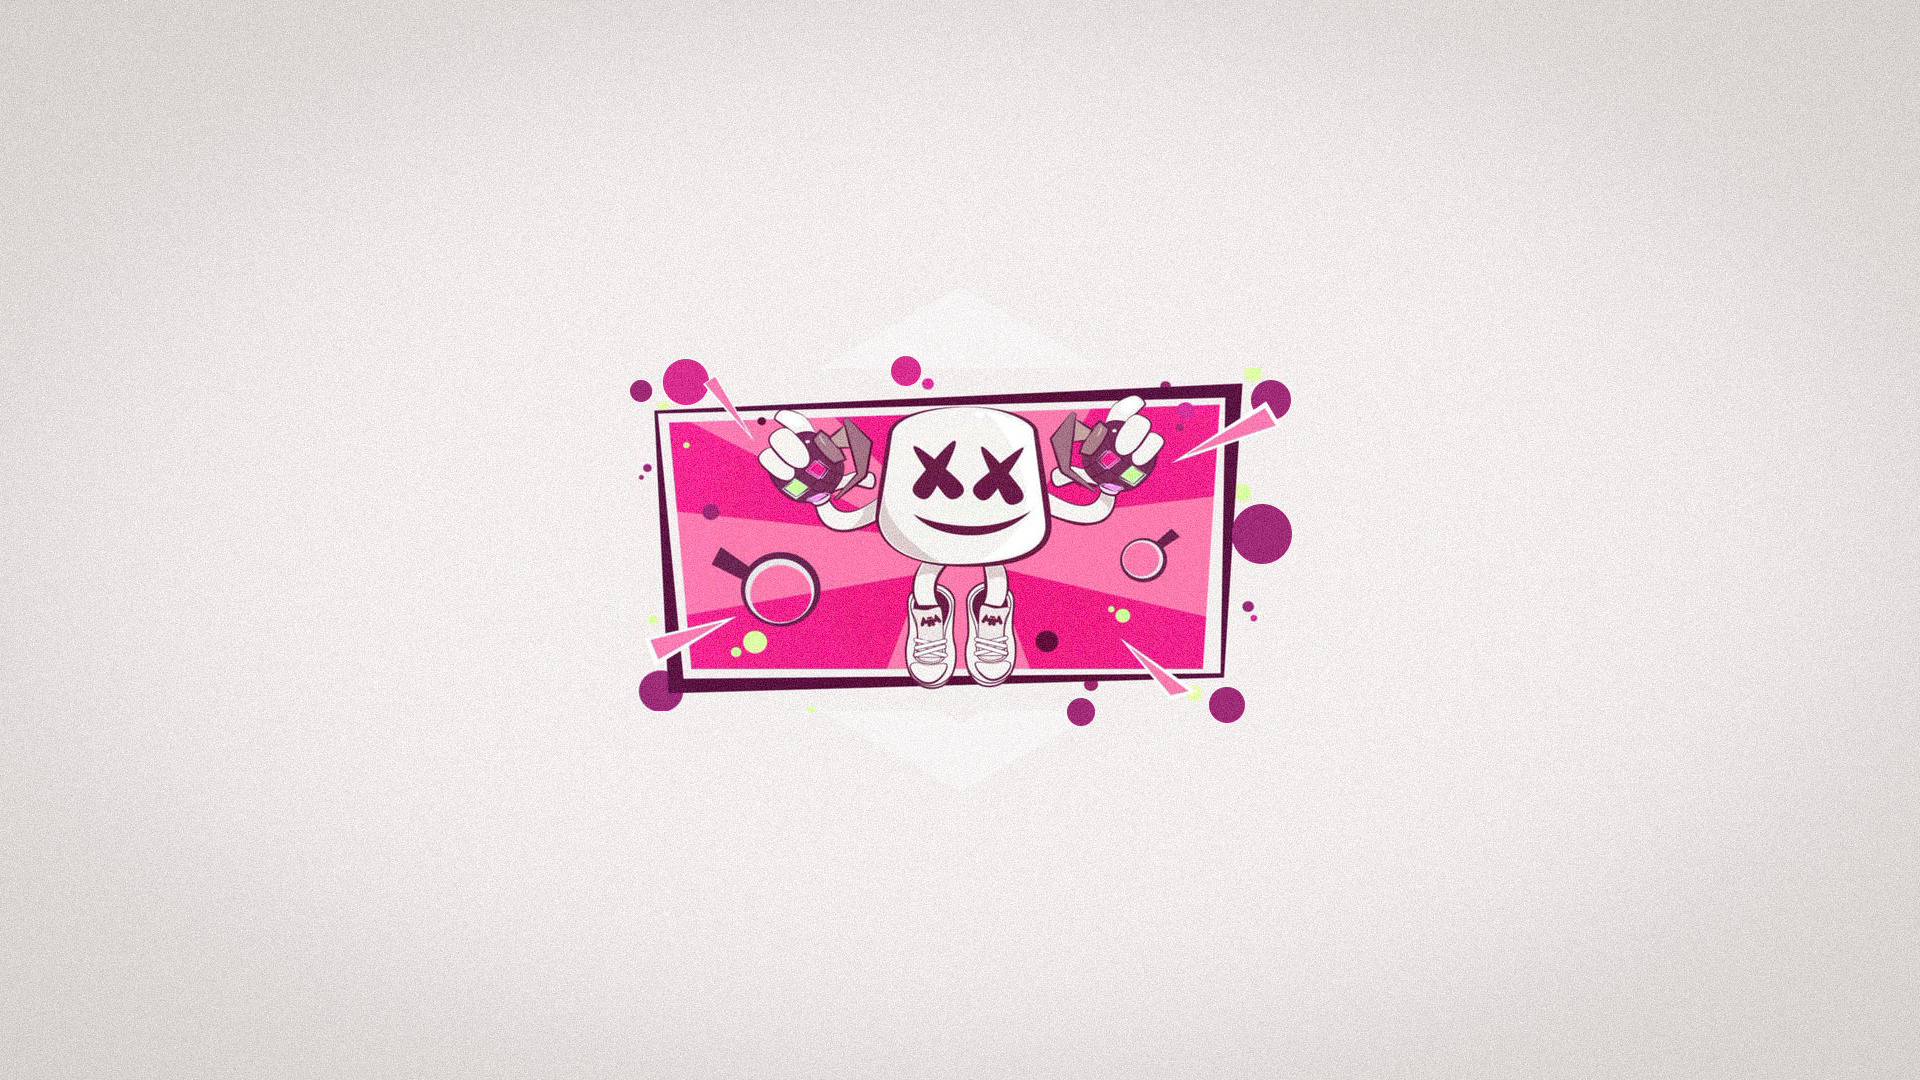 General 1920x1080 Marshmello  Fortnite concerts Marshmallow Man pink clouds white